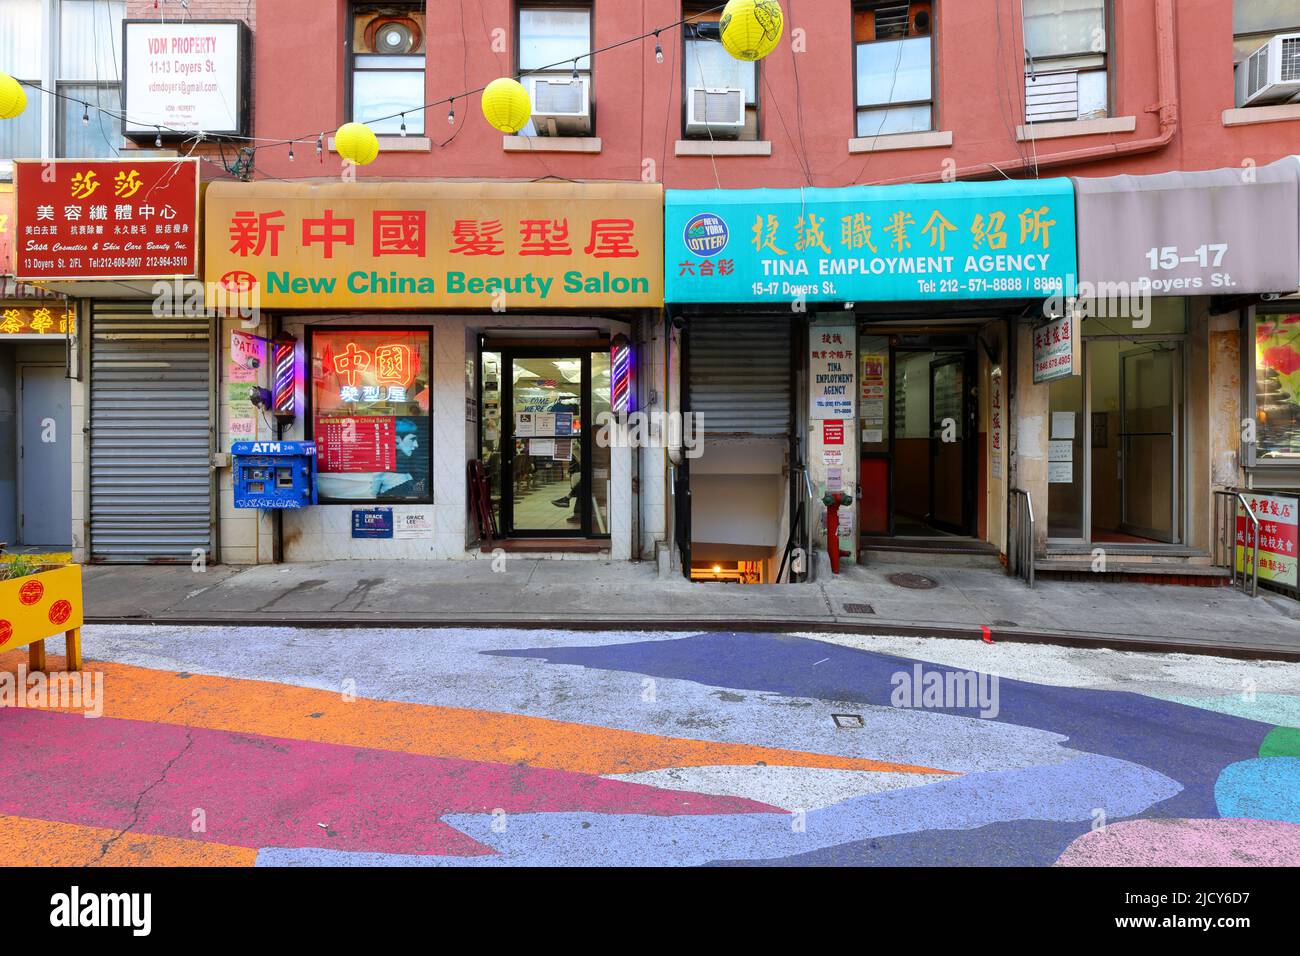 New China Beauty Salon, employment agency, 15-17 Doyers St, New York, NY. exterior storefronts in Manhattan Chinatown. Stock Photo